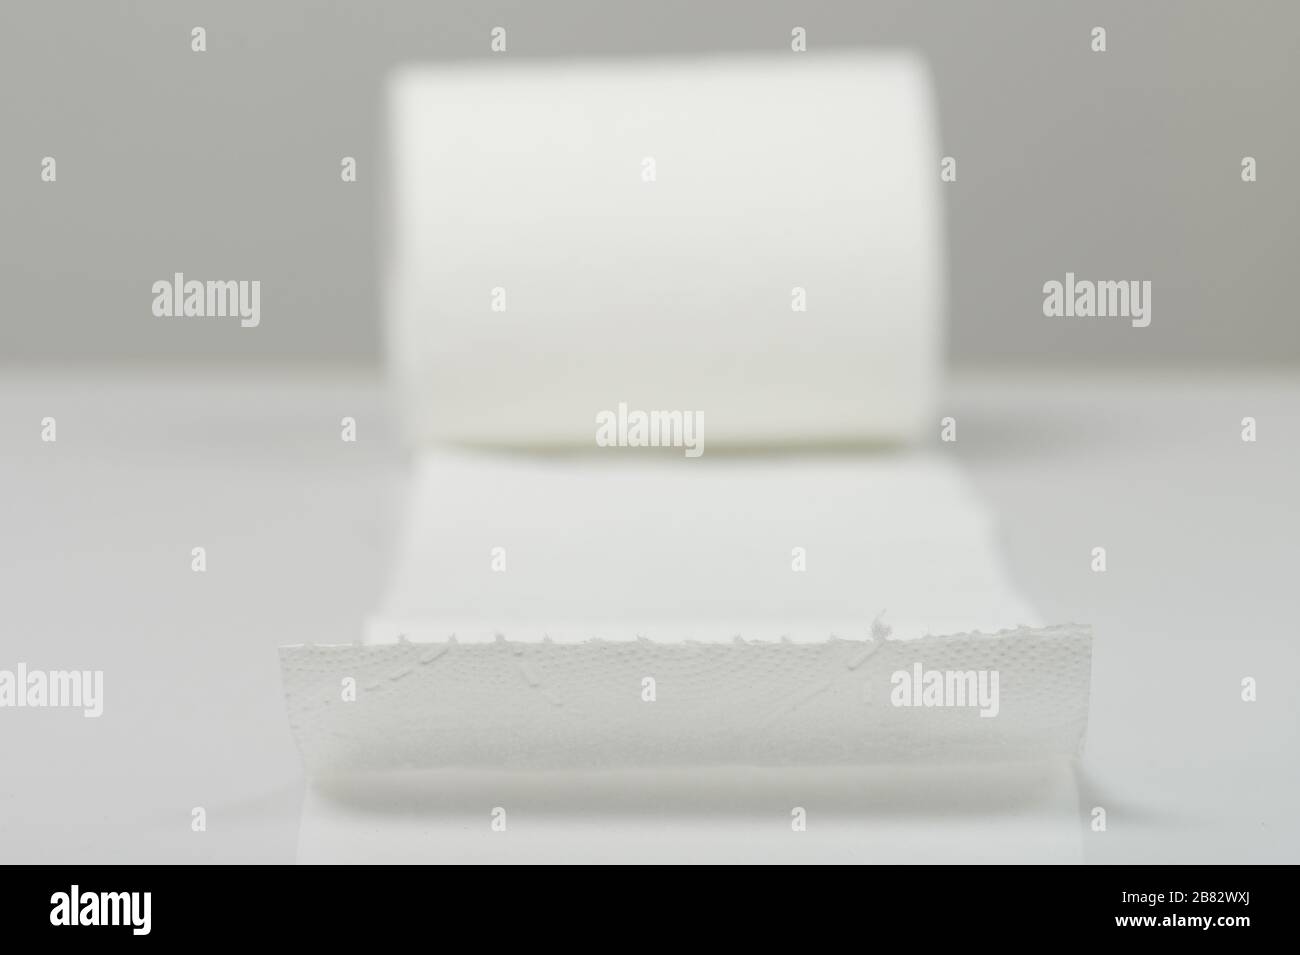 Edge of white soft toilet paper clsoe up view Stock Photo